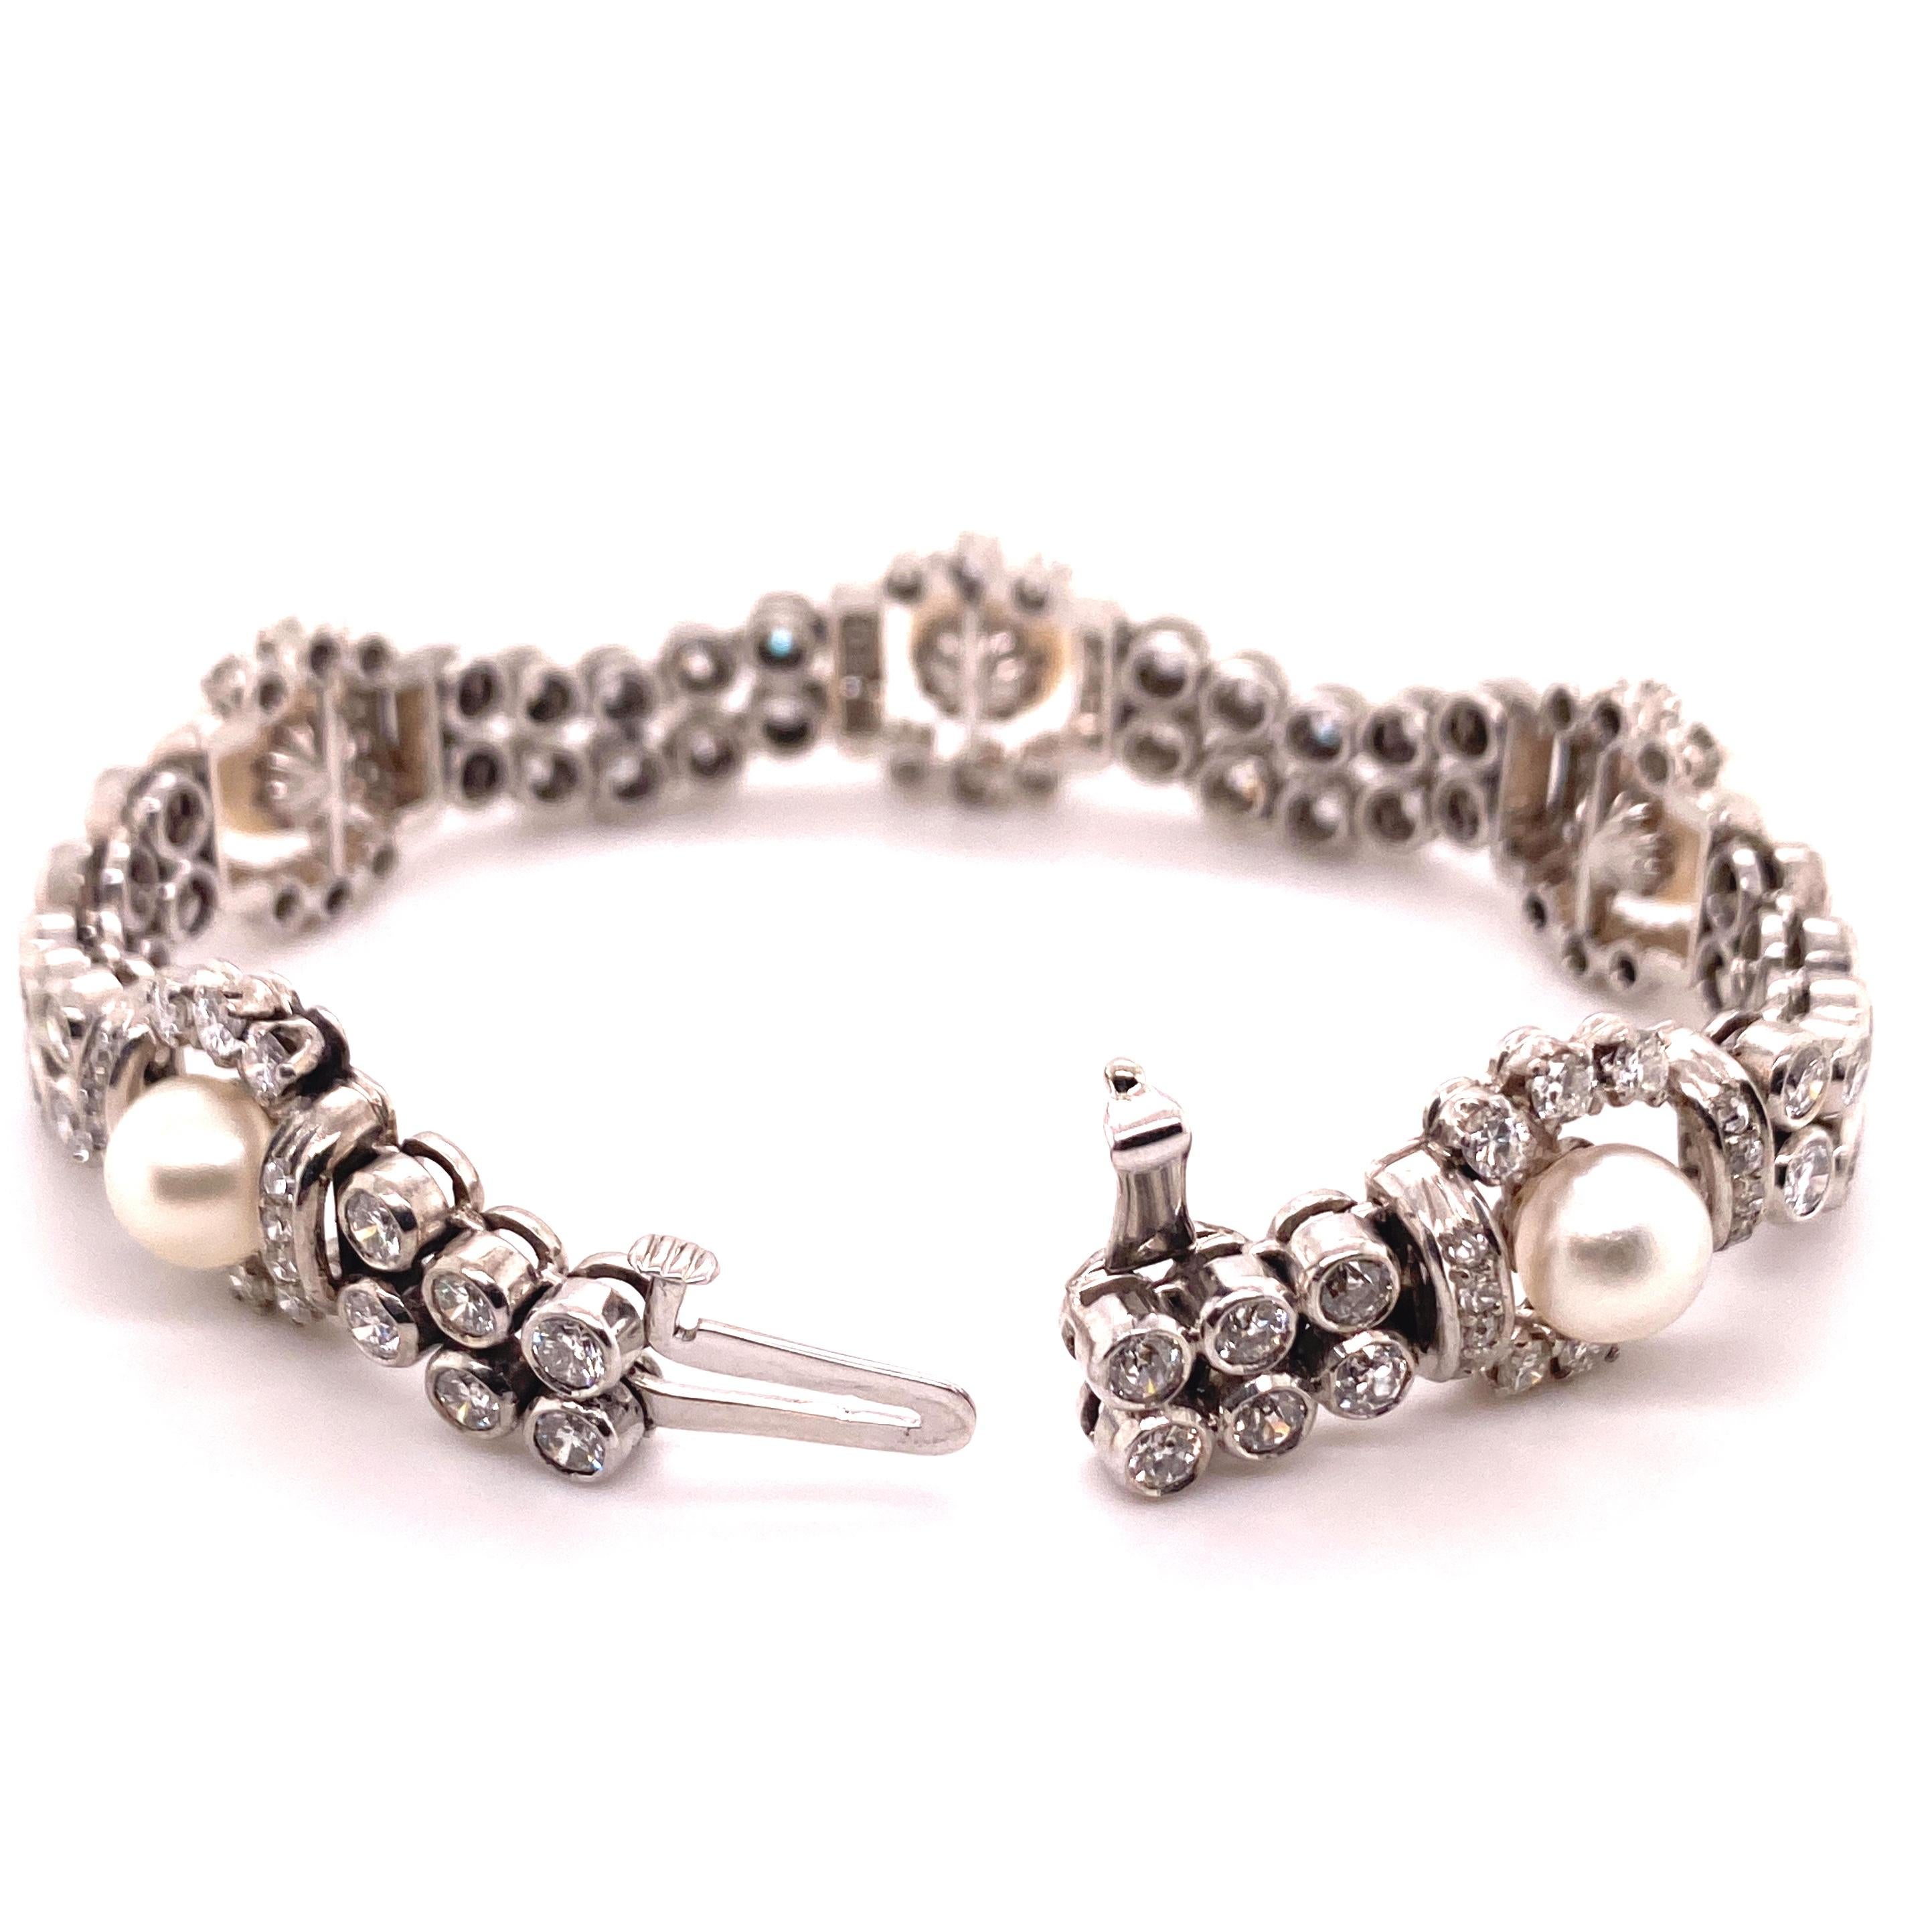 This elegant and timeless bracelet in 18 karat white gold is set with 5 natural pearl buttons from 7.2 to 8.8 mm in diameter. The pearls are of white to slightly cream colour and have a smooth surface and a soft luster. 
The bracelet is made of two